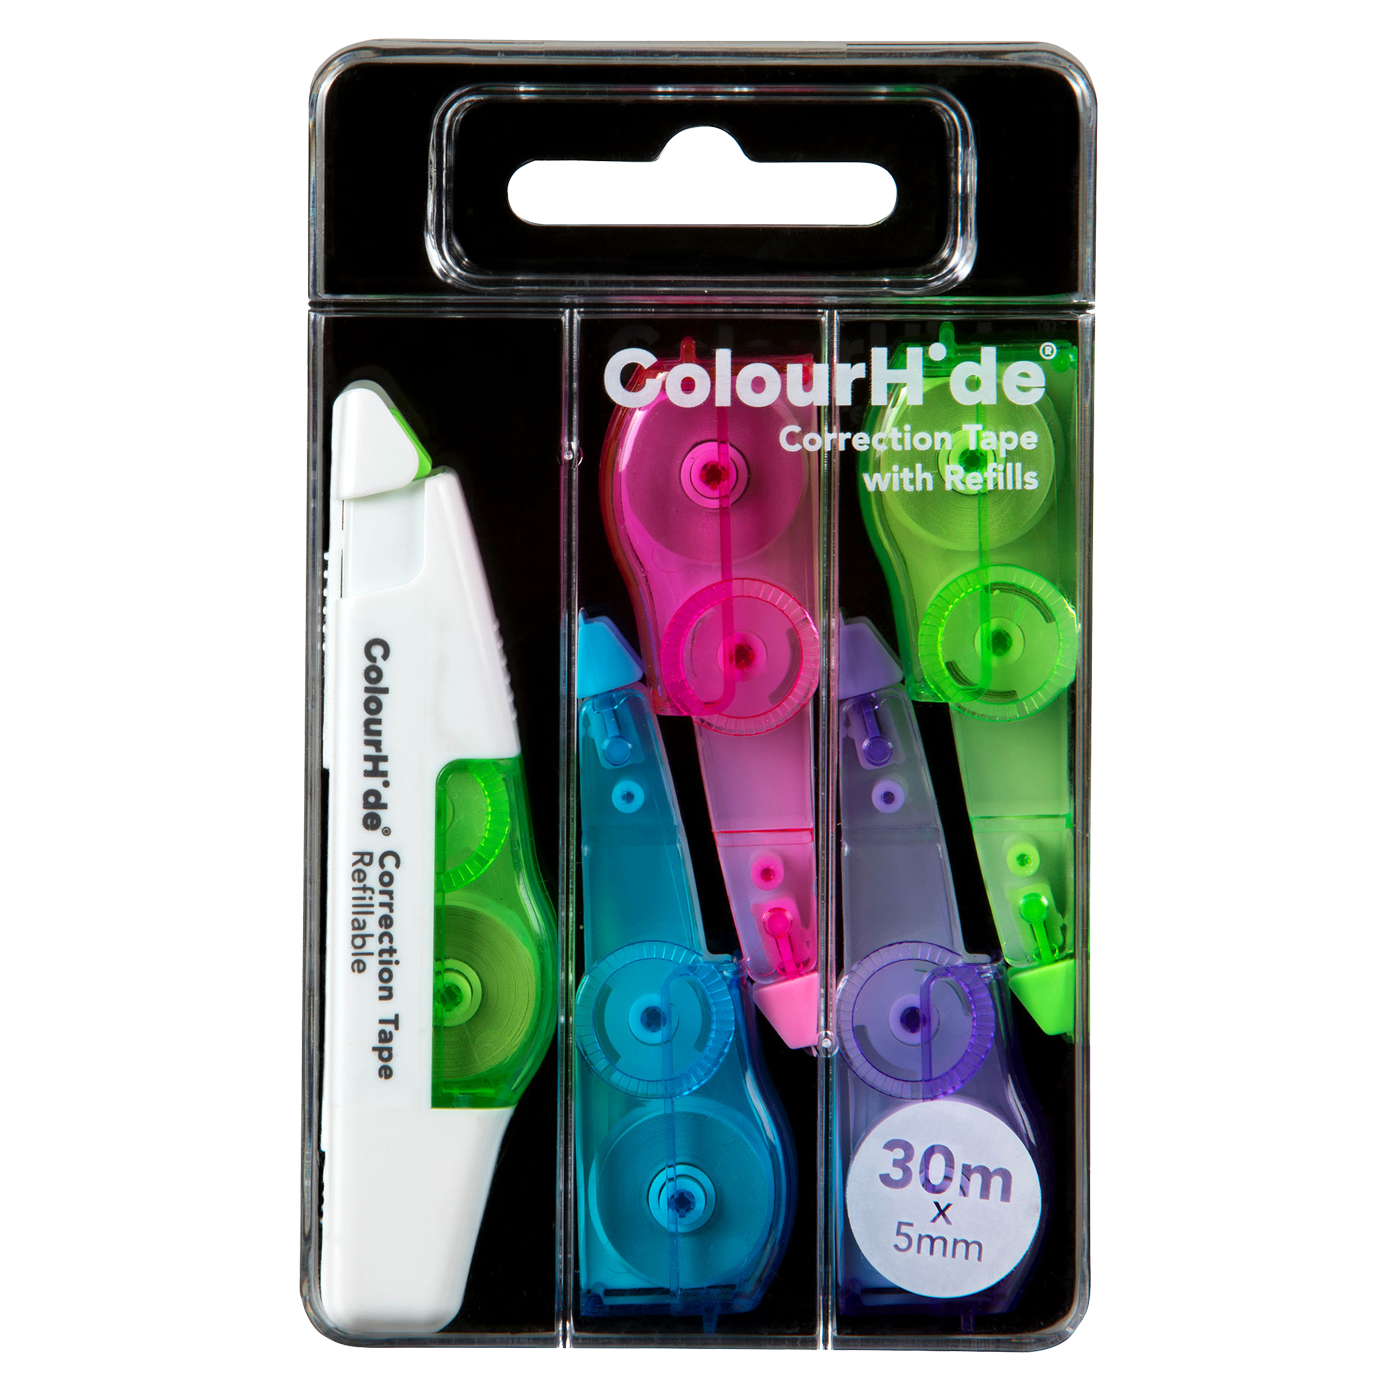 ColourHide Correction Tape 30 m x 5 mm Assorted